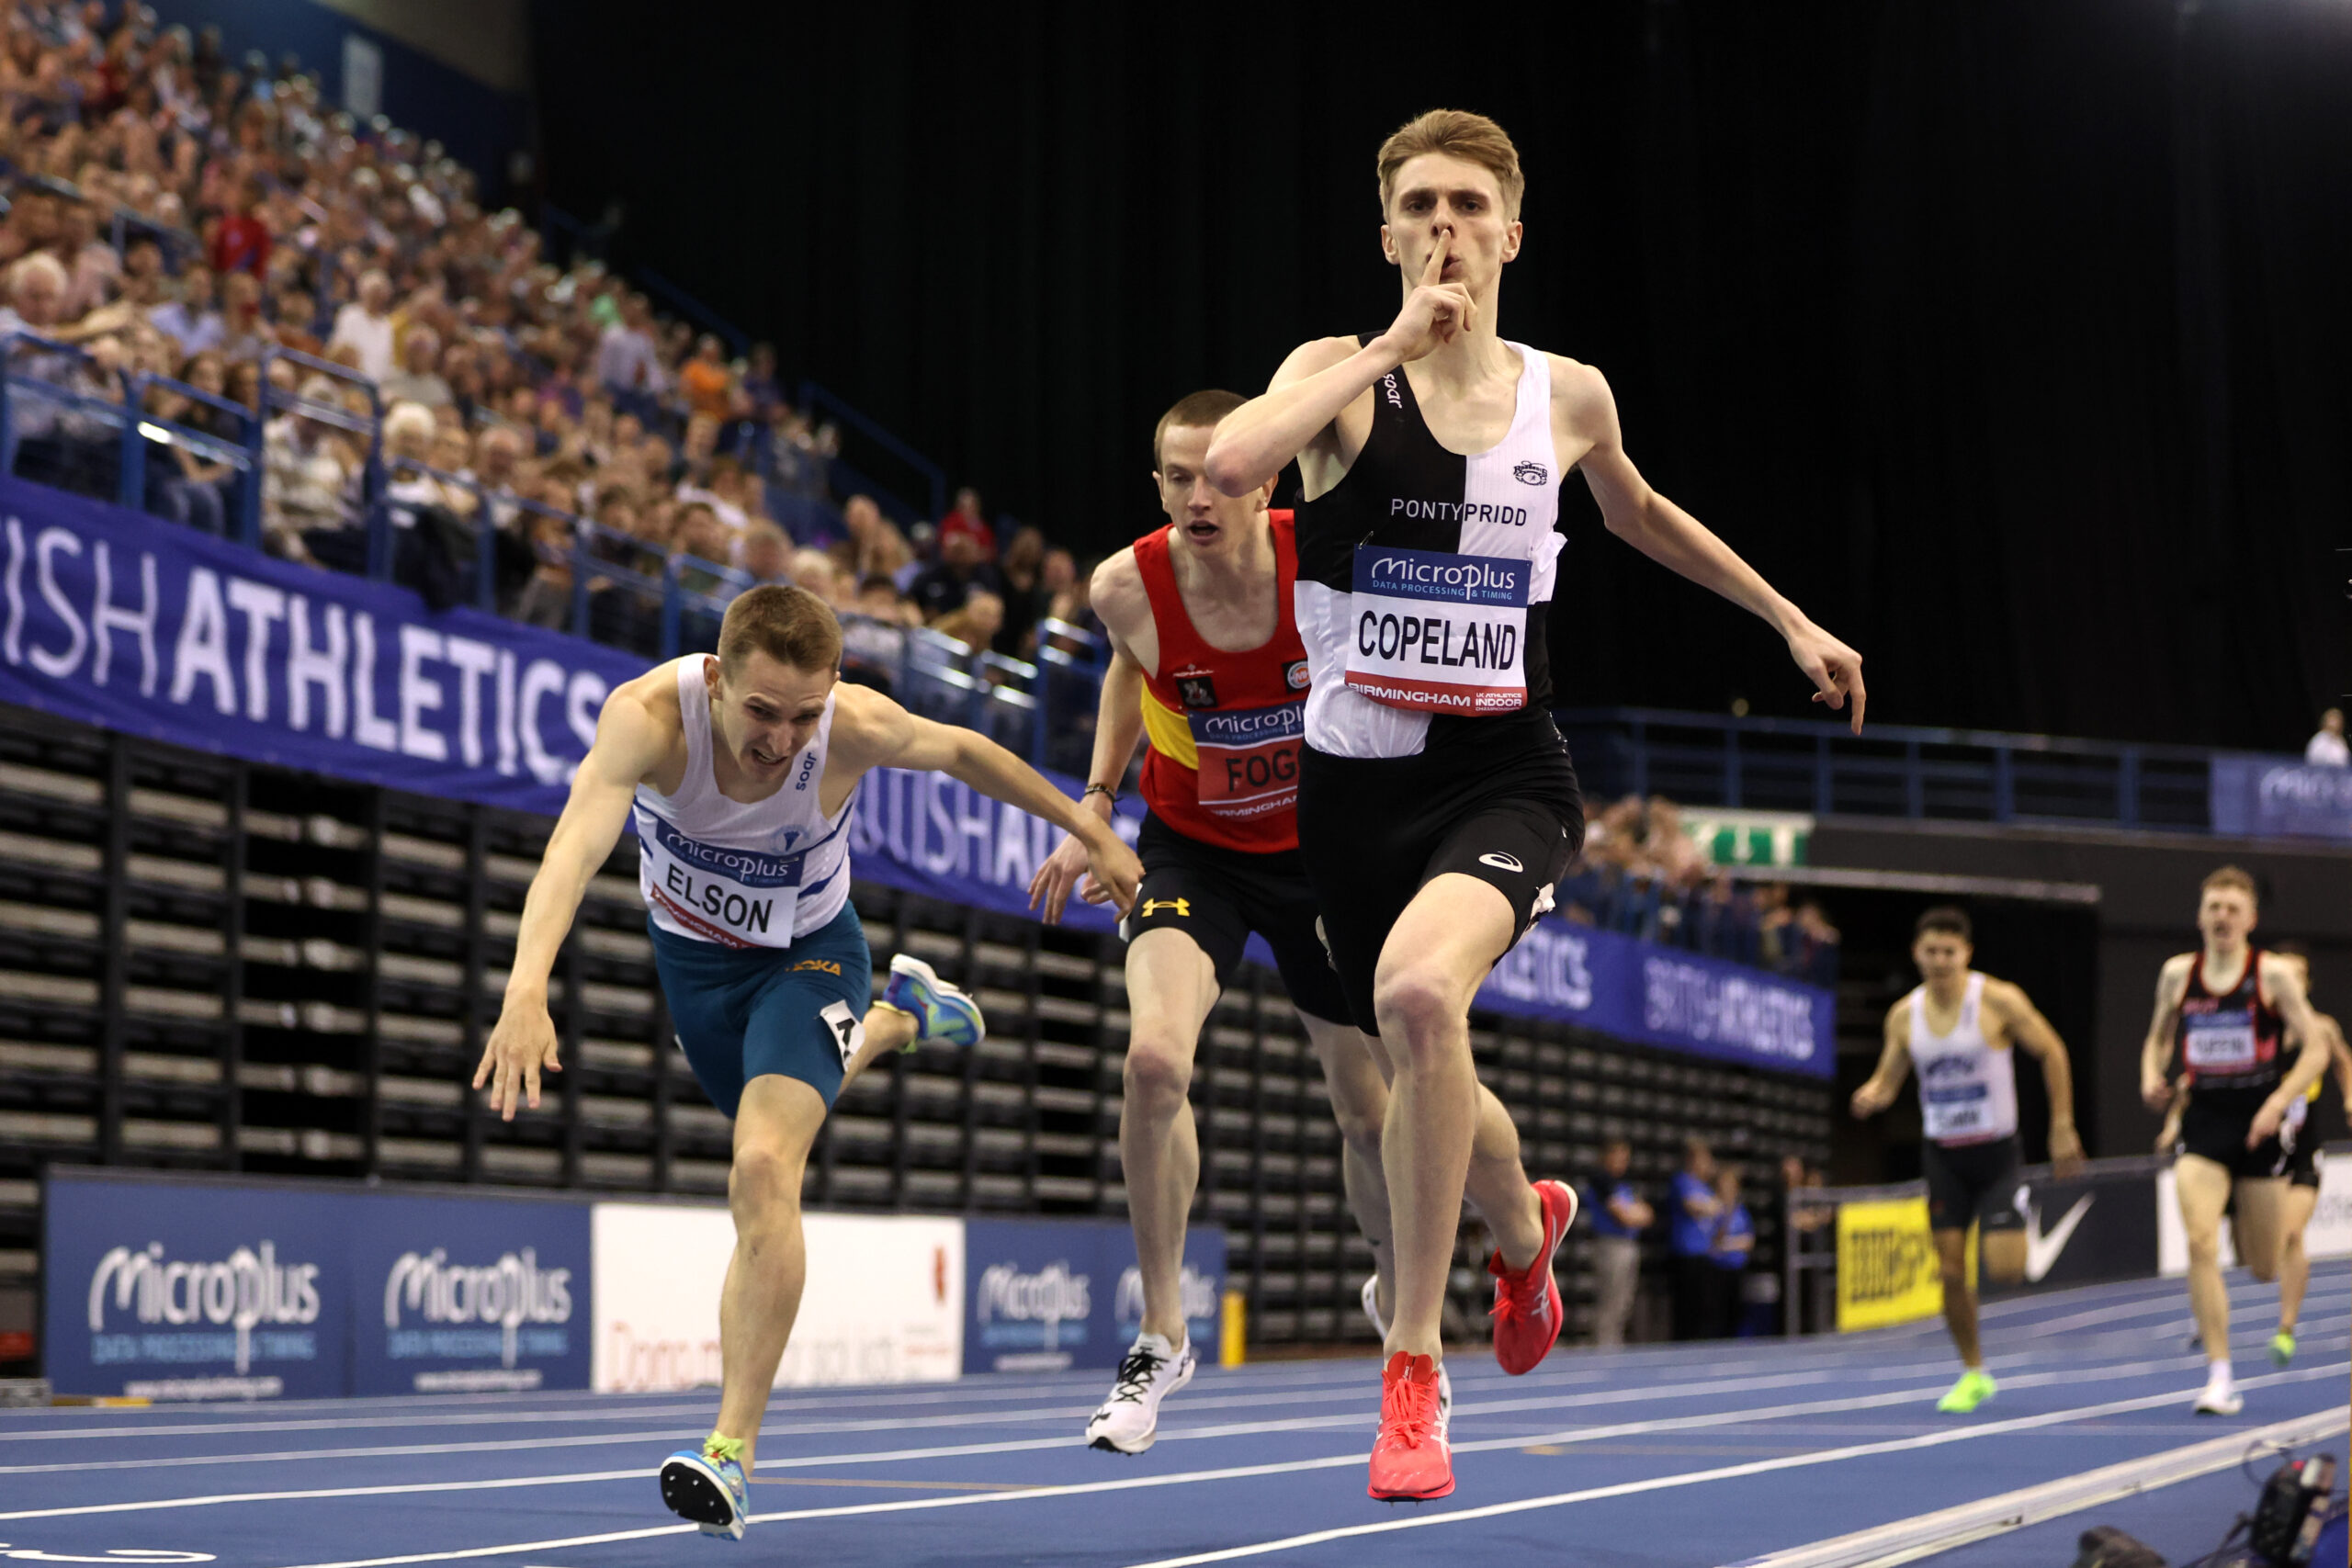 BIRMINGHAM, ENGLAND - FEBRUARY 18: Silver medalist, Callum Elson (L), Bronze medalist, Adam Fogg (C), and Gold medalist, Piers Copeland of Great Britain (R) cross the line in the Men's 1500m Final during day two of the 2024 Microplus UK Athletics Indoor Championships at Utilita Arena Birmingham on February 18, 2024 in Birmingham, England. 